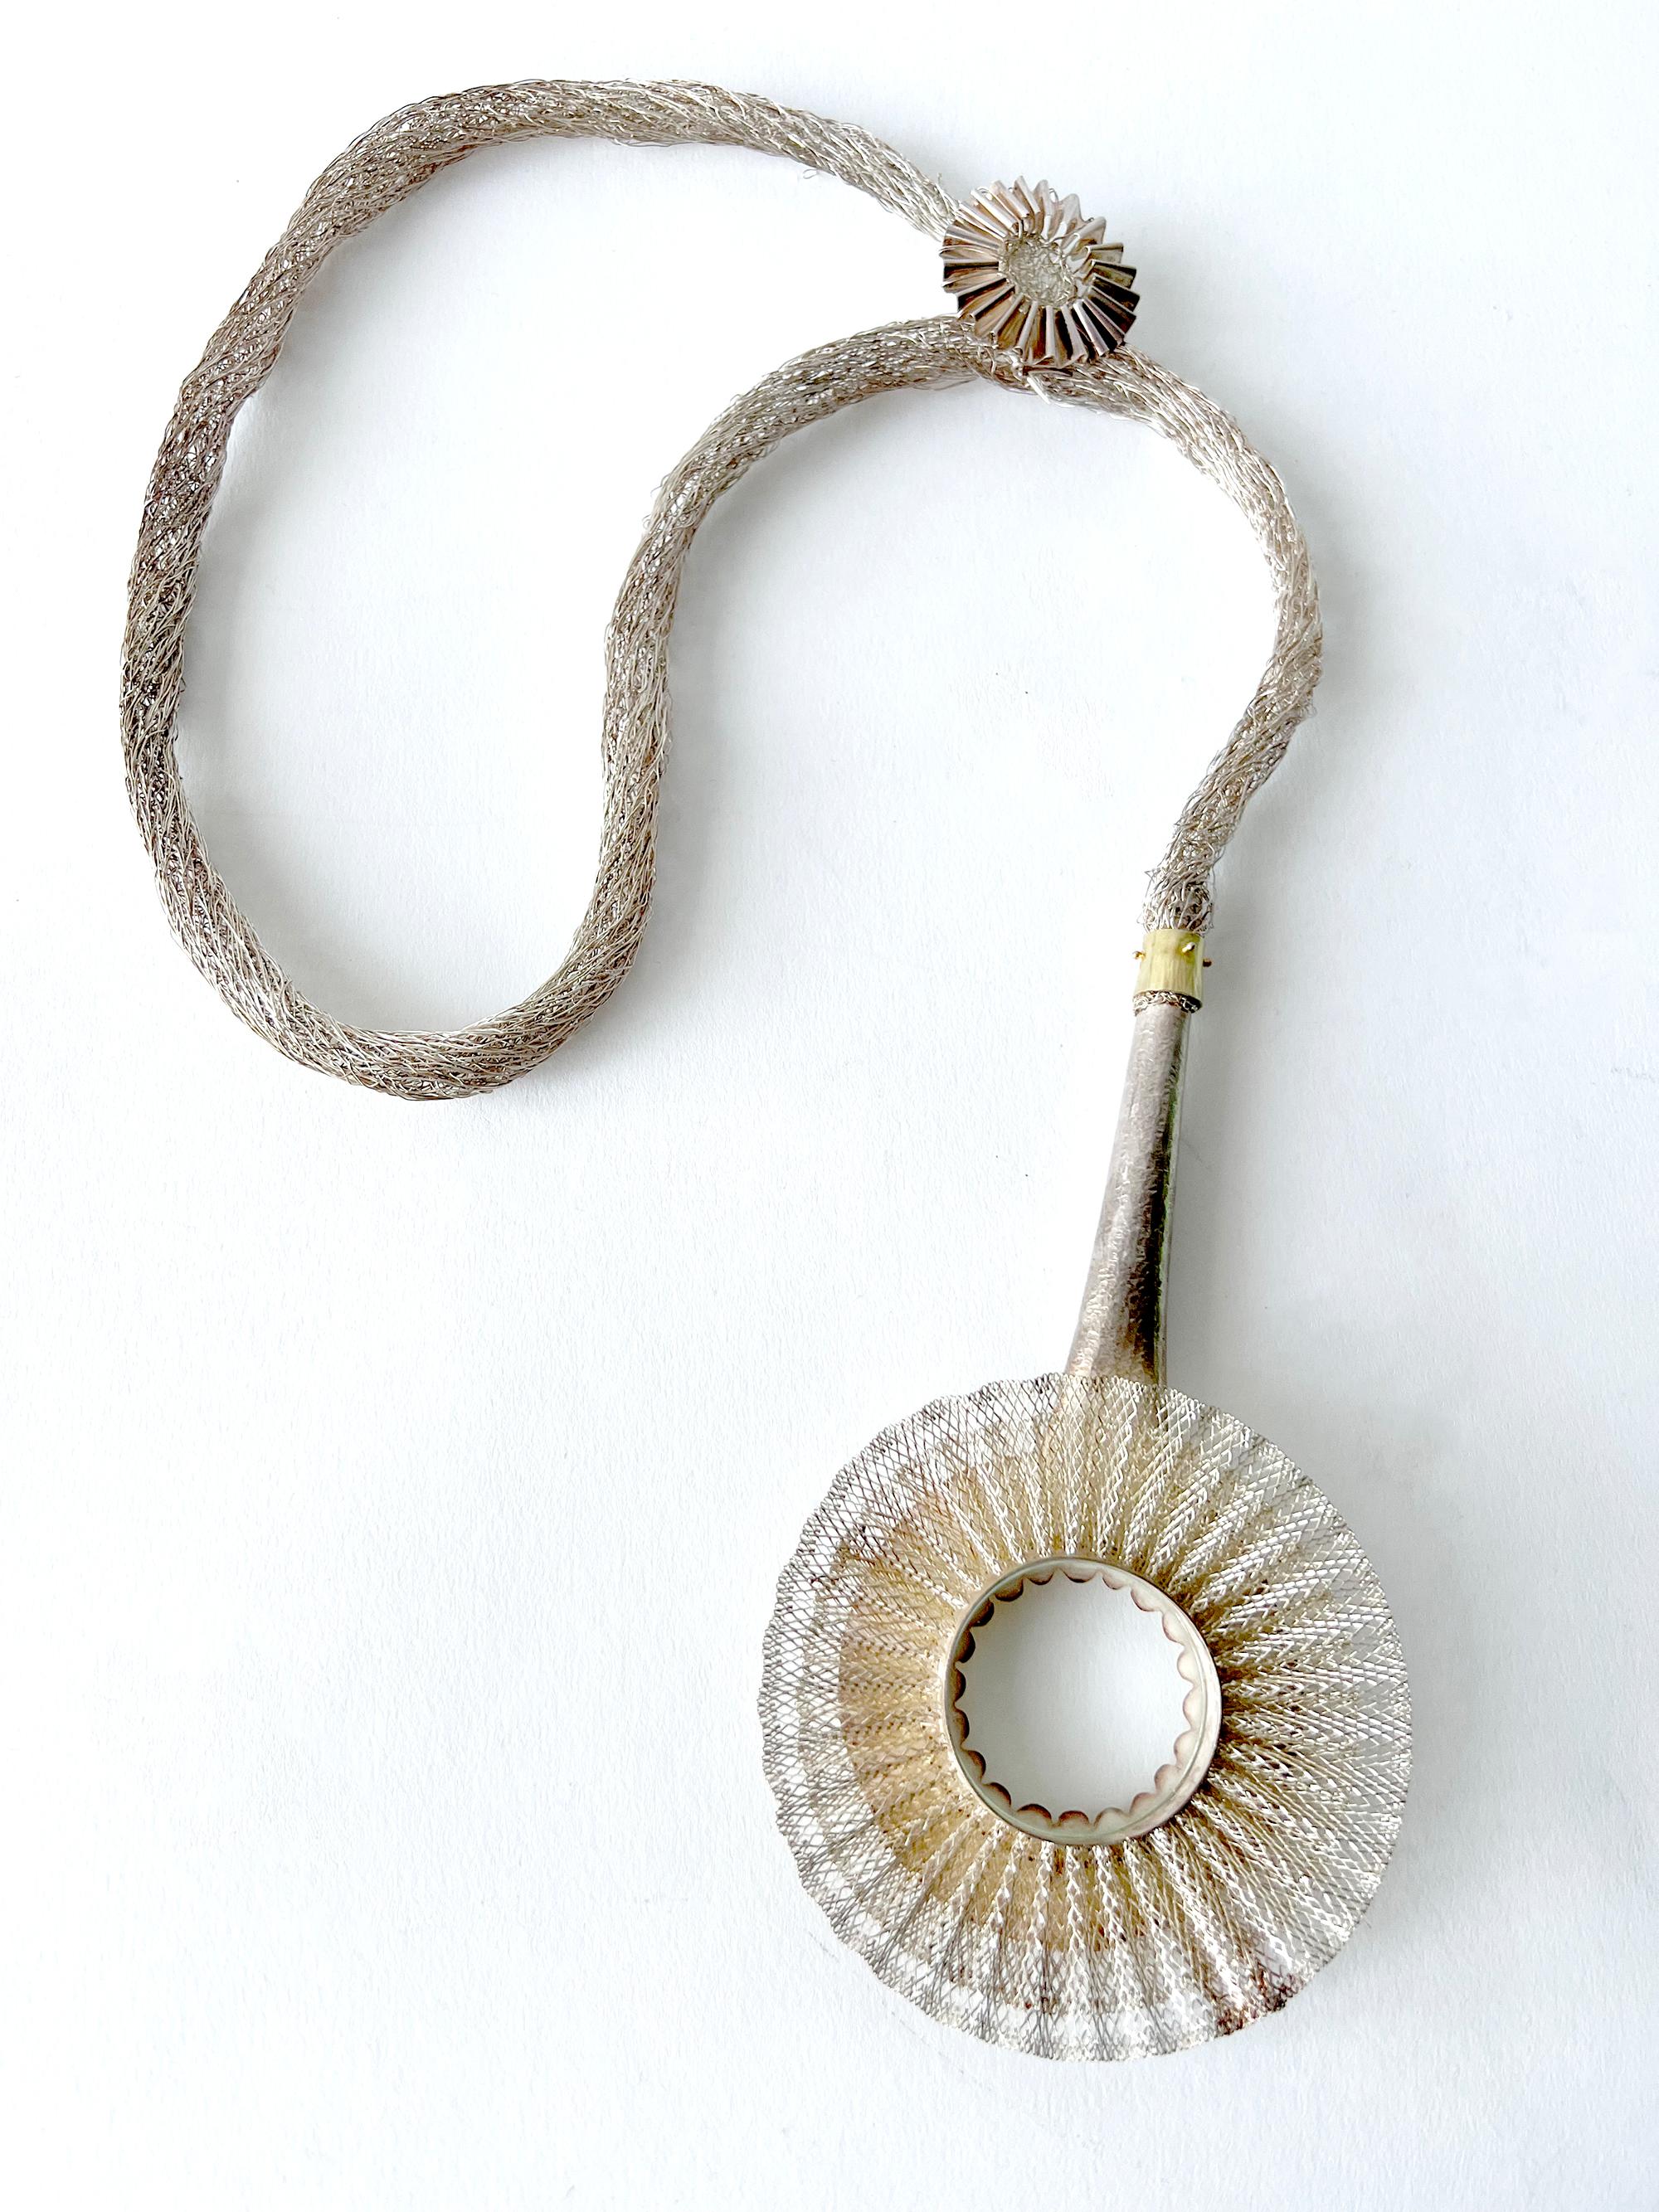 Rare, hand crocheted sterling silver sautoir with fluted gold vermeil magnifying glass monocle created by Arline Fisch of San Diego, California.  Piece measures 33.5